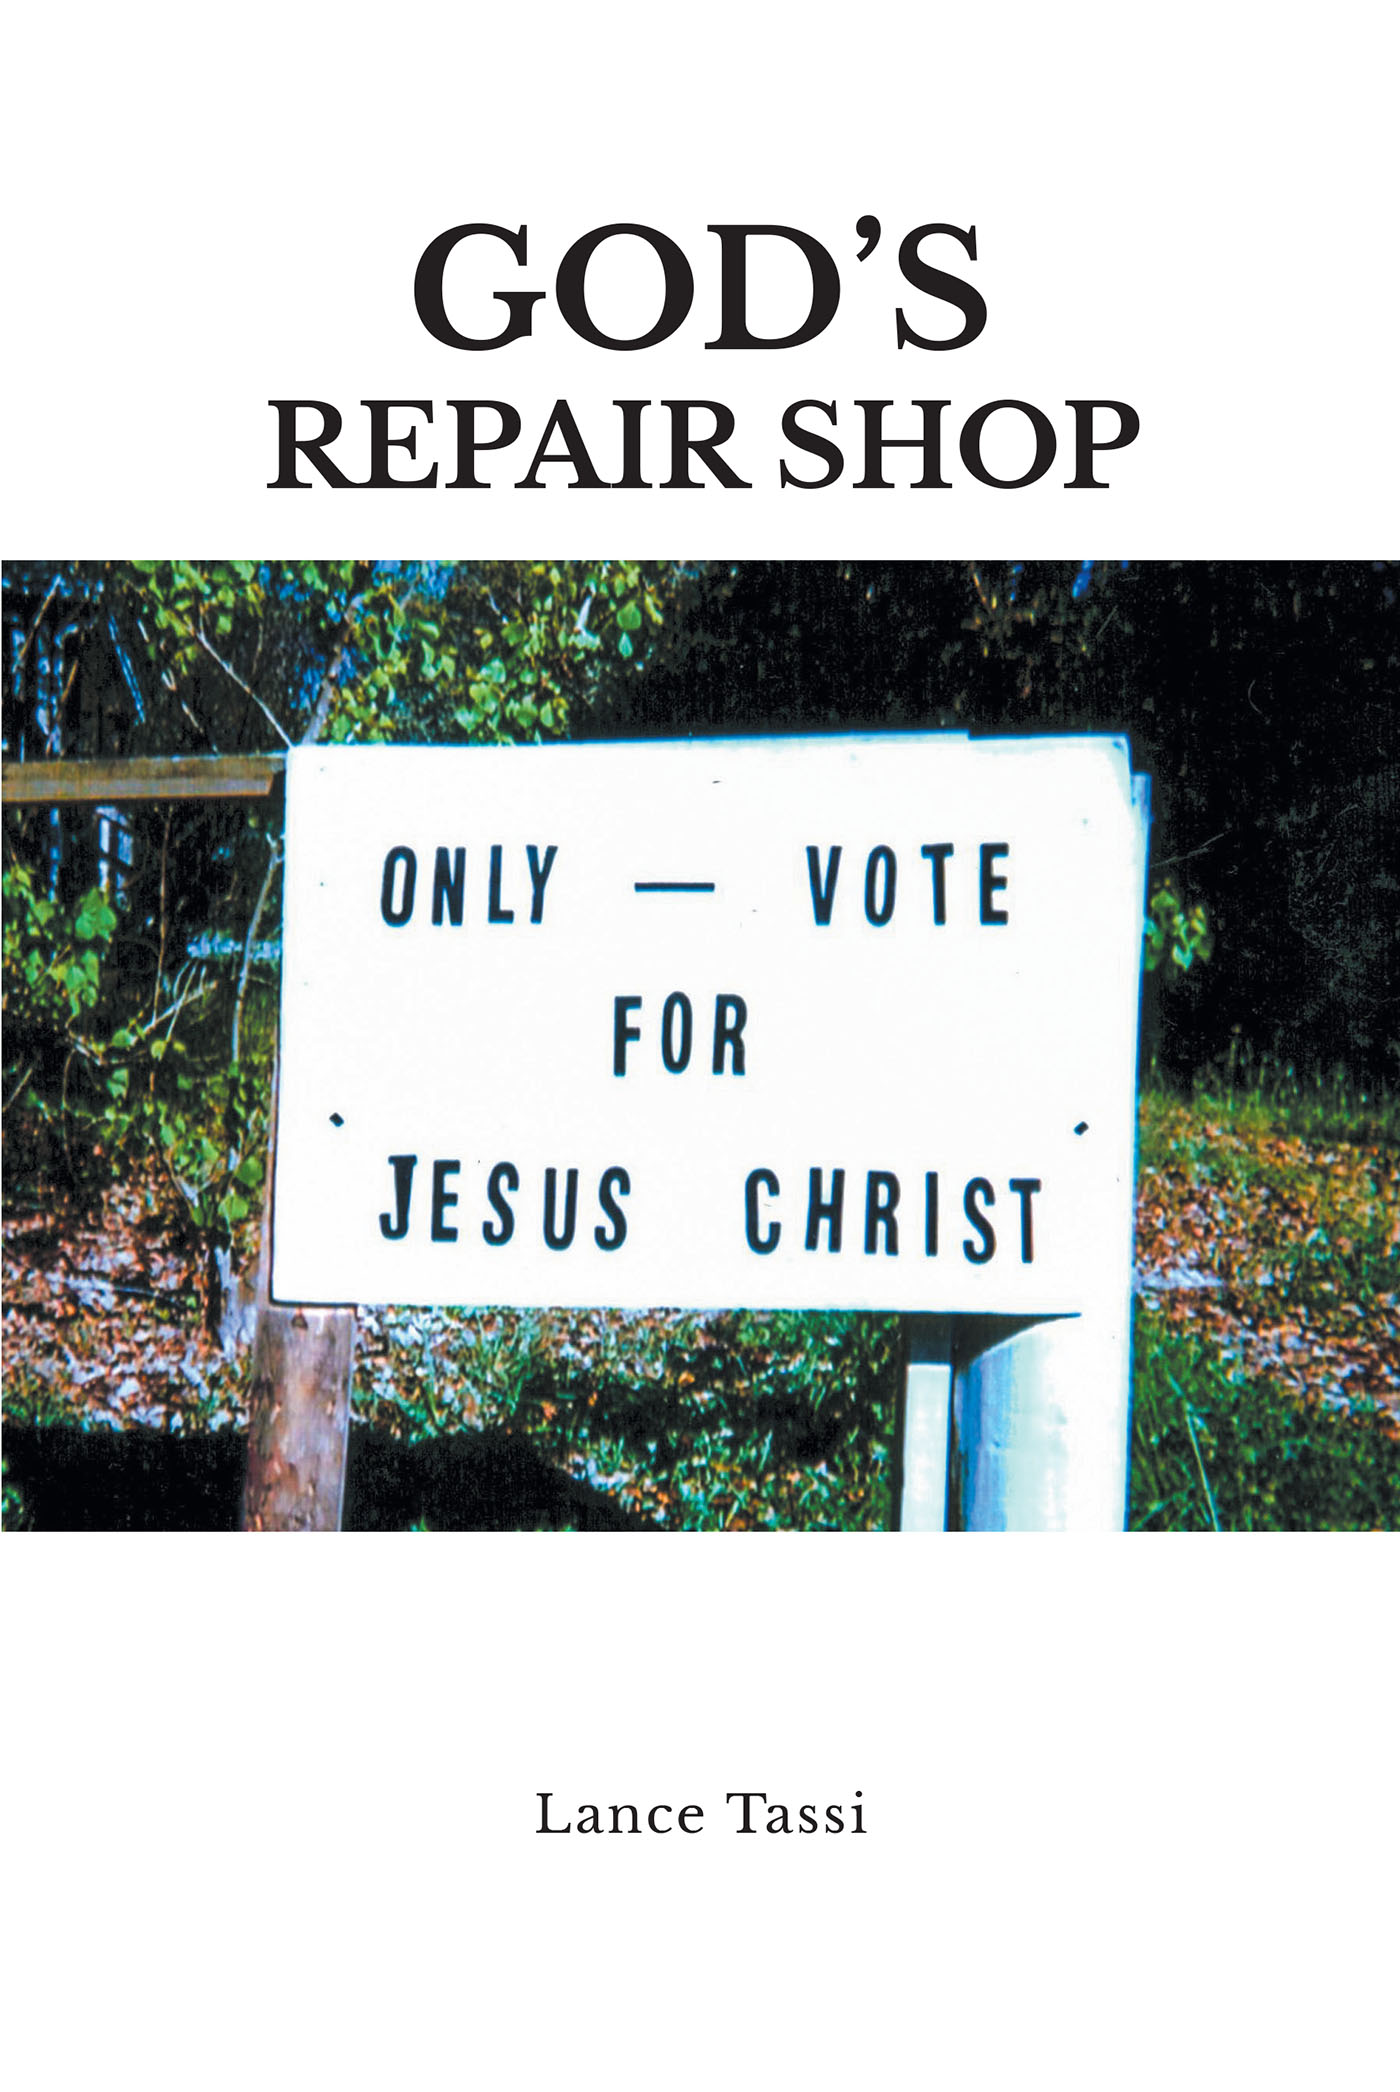 Lance Tassi’s Newly Released "God’s Repair Shop" is a Thought-Provoking Discussion of Needing Change and a Return to a God-Focused Society